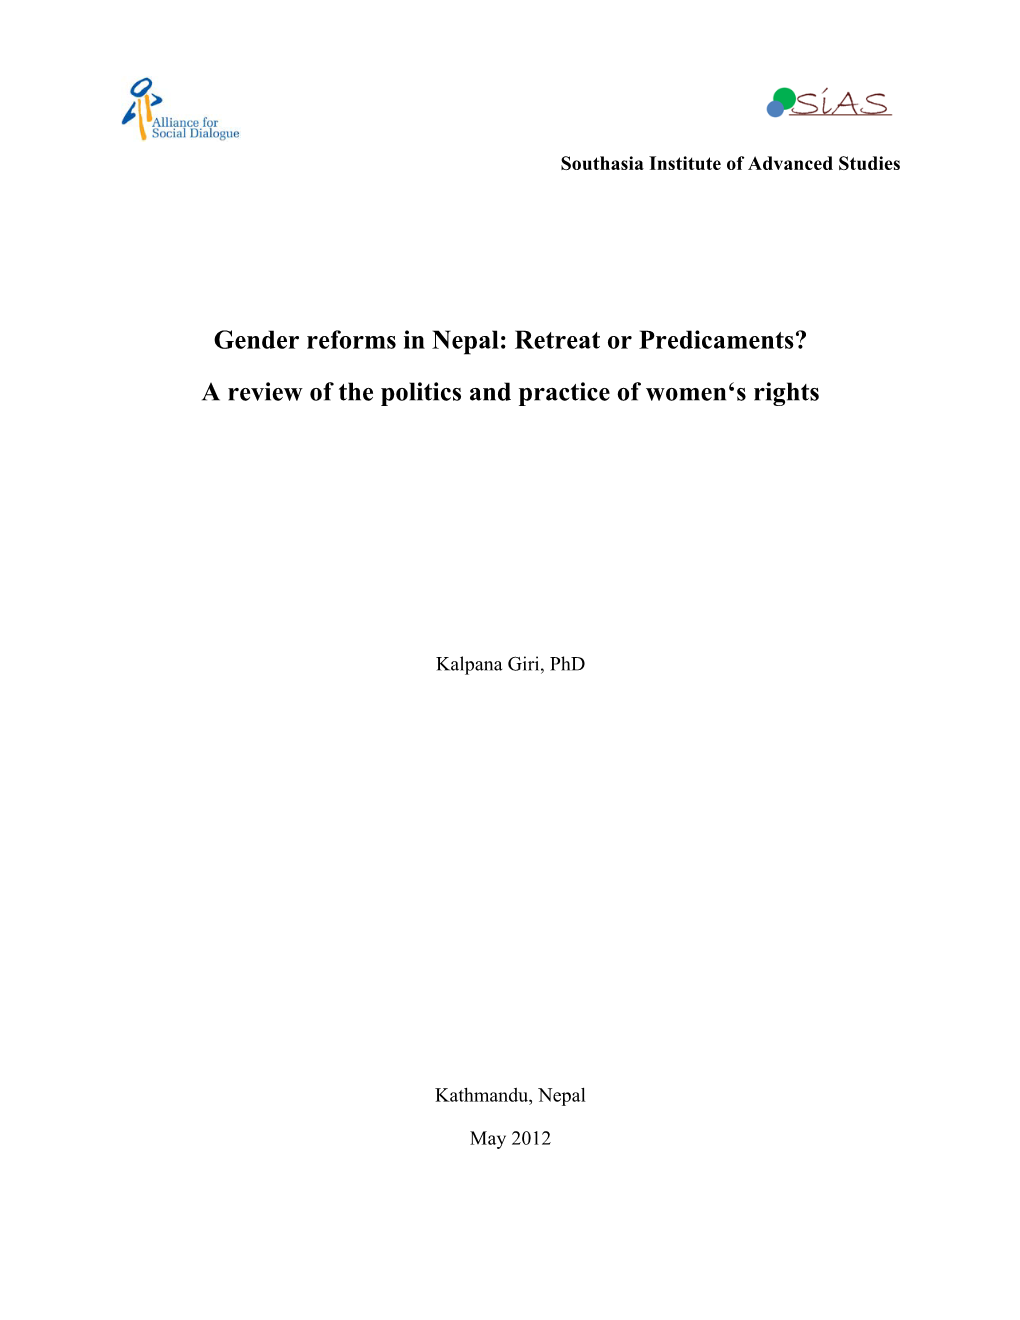 Gender Reforms in Nepal: Retreat Or Predicaments? a Review of the Politics and Practice of Women‘S Rights